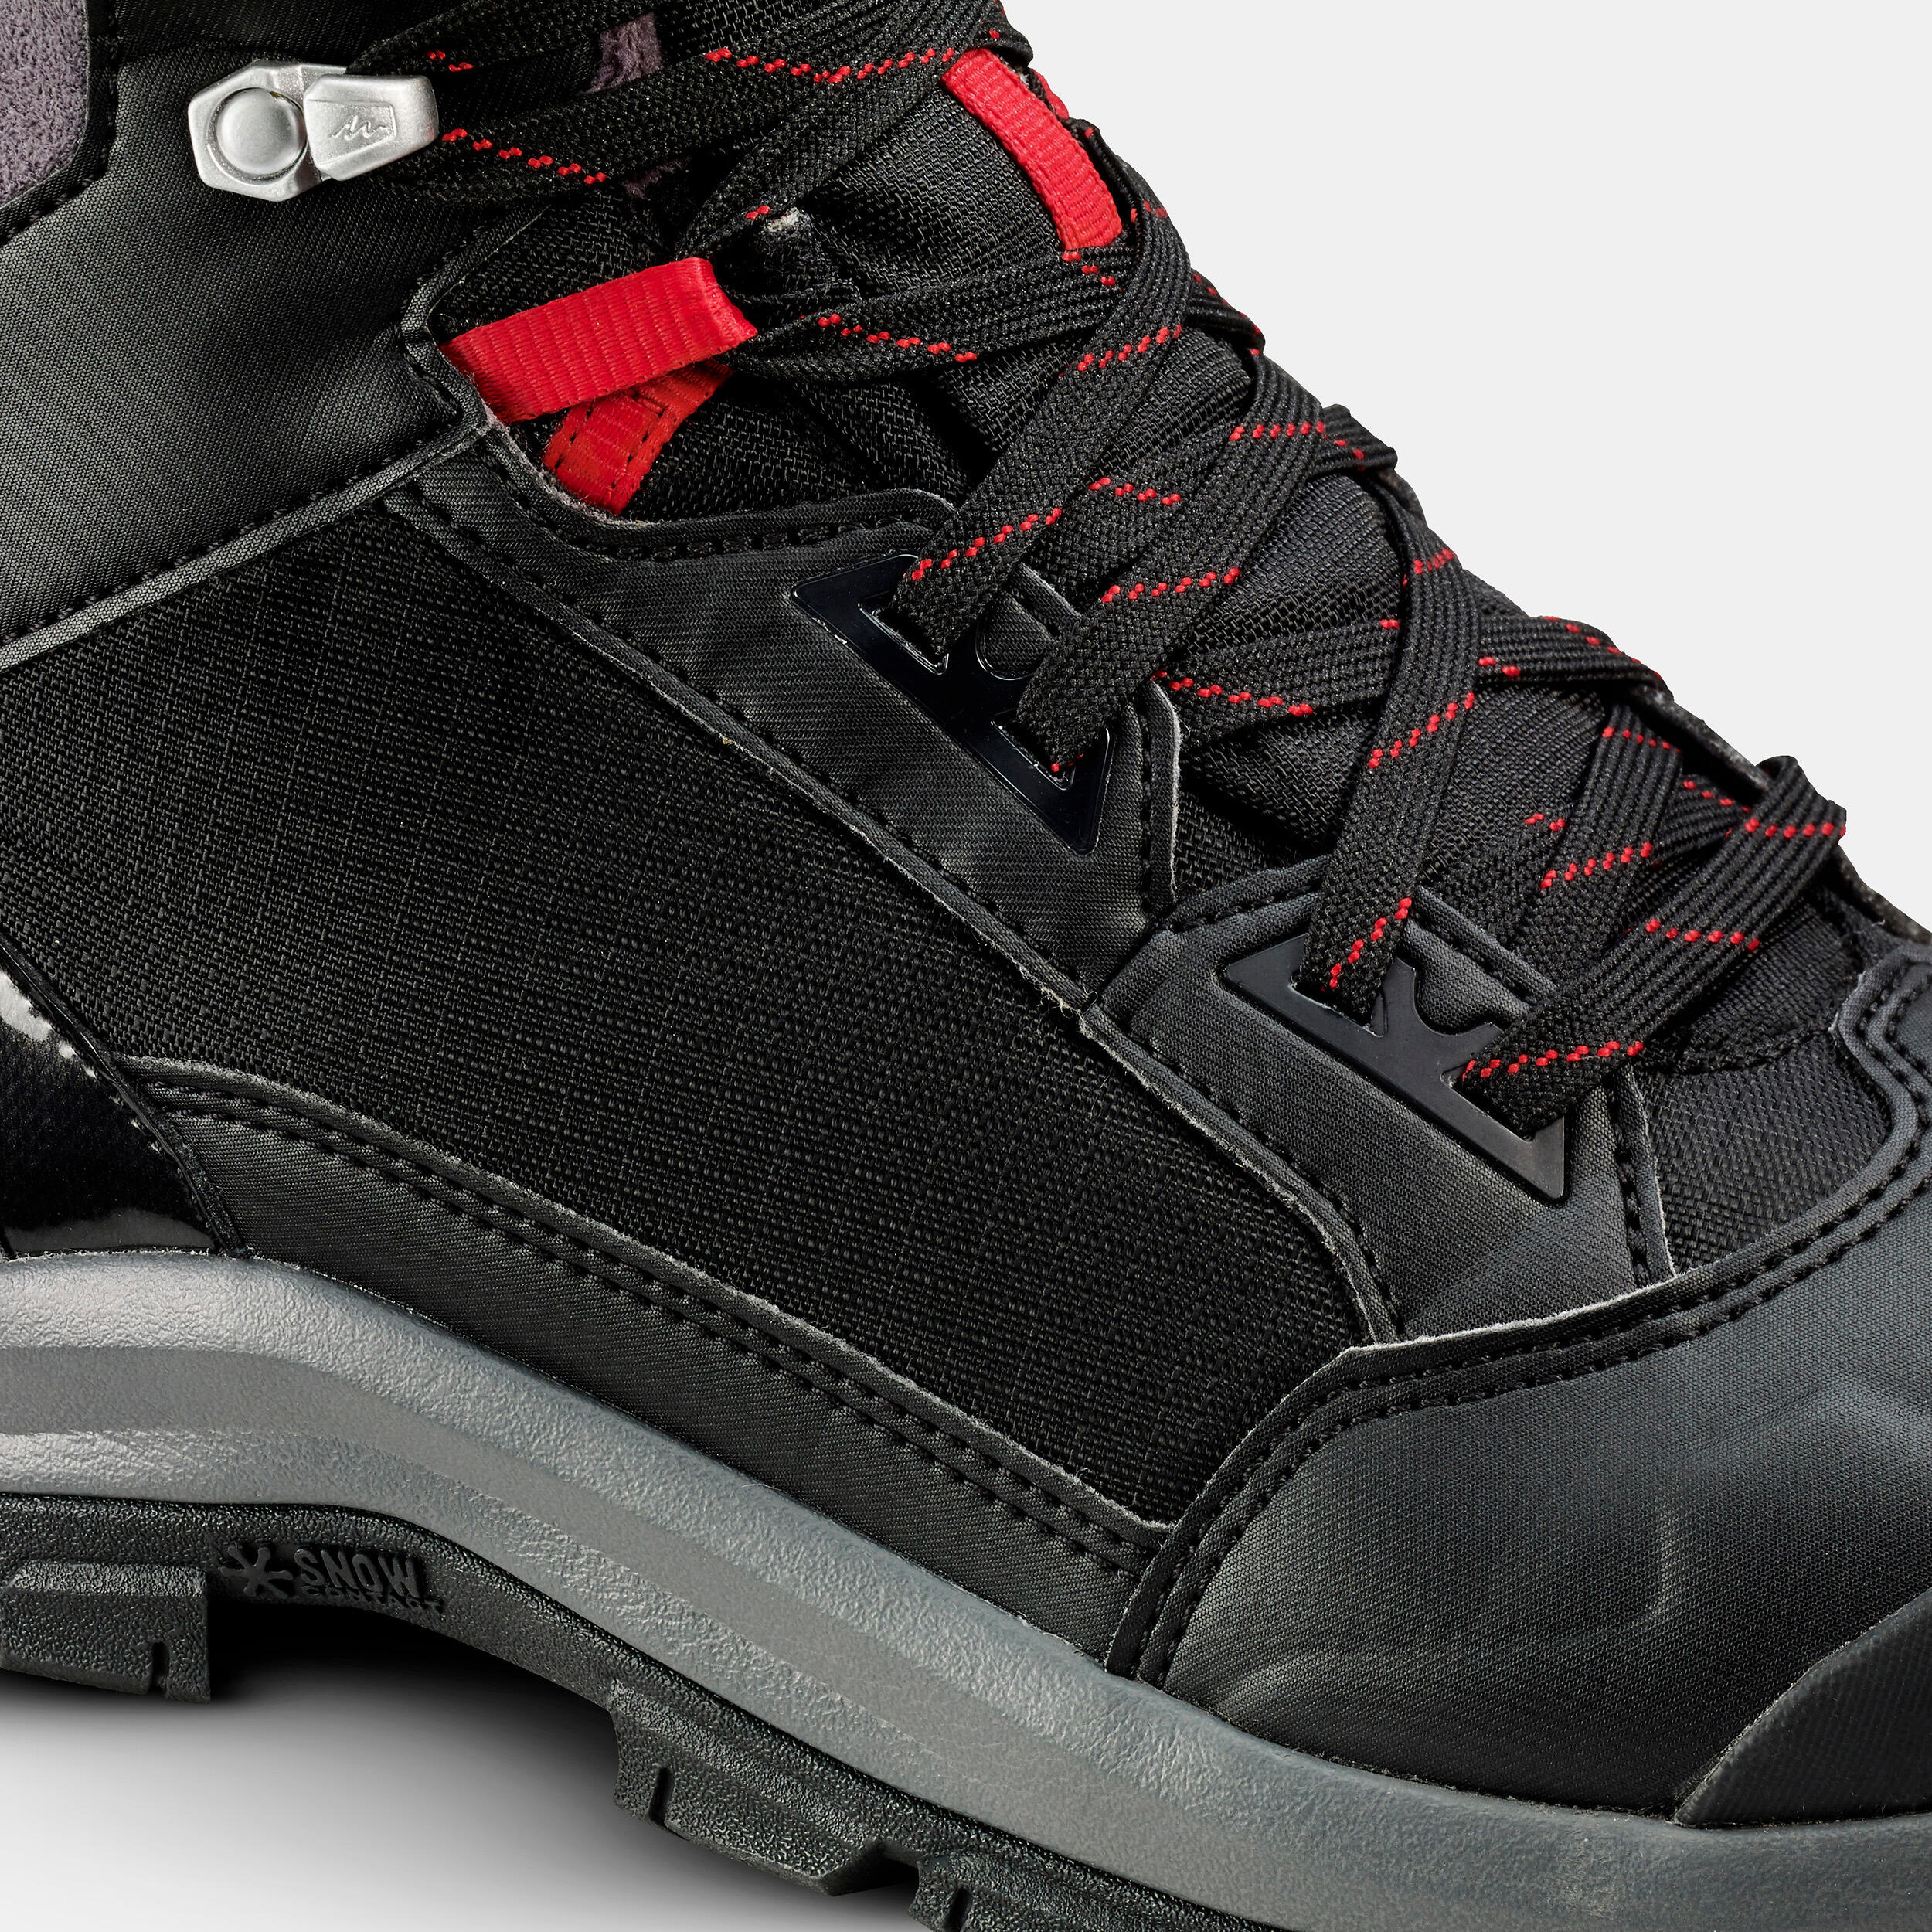 Men’s Warm and Waterproof Hiking Boots - SH500 mountain MID 7/12